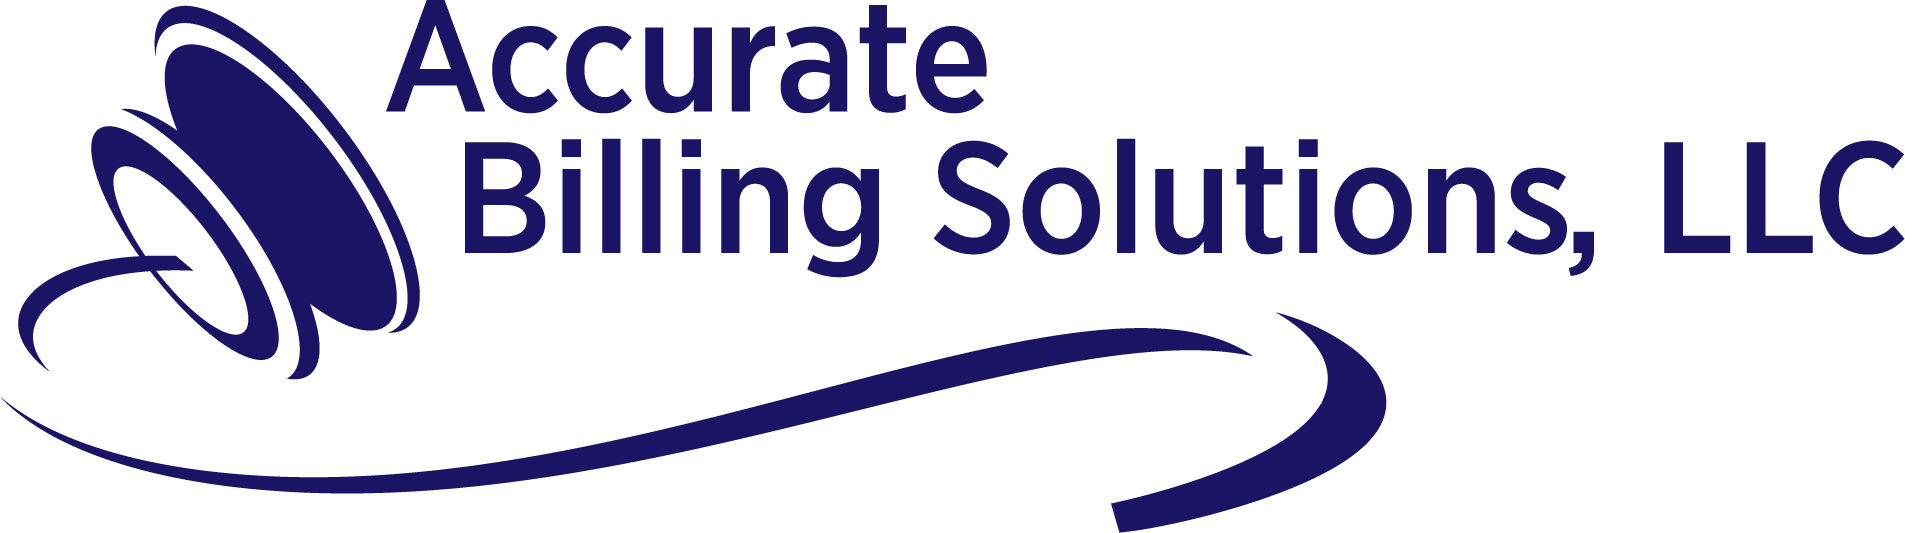 Accurate Billing Solutions, LLC